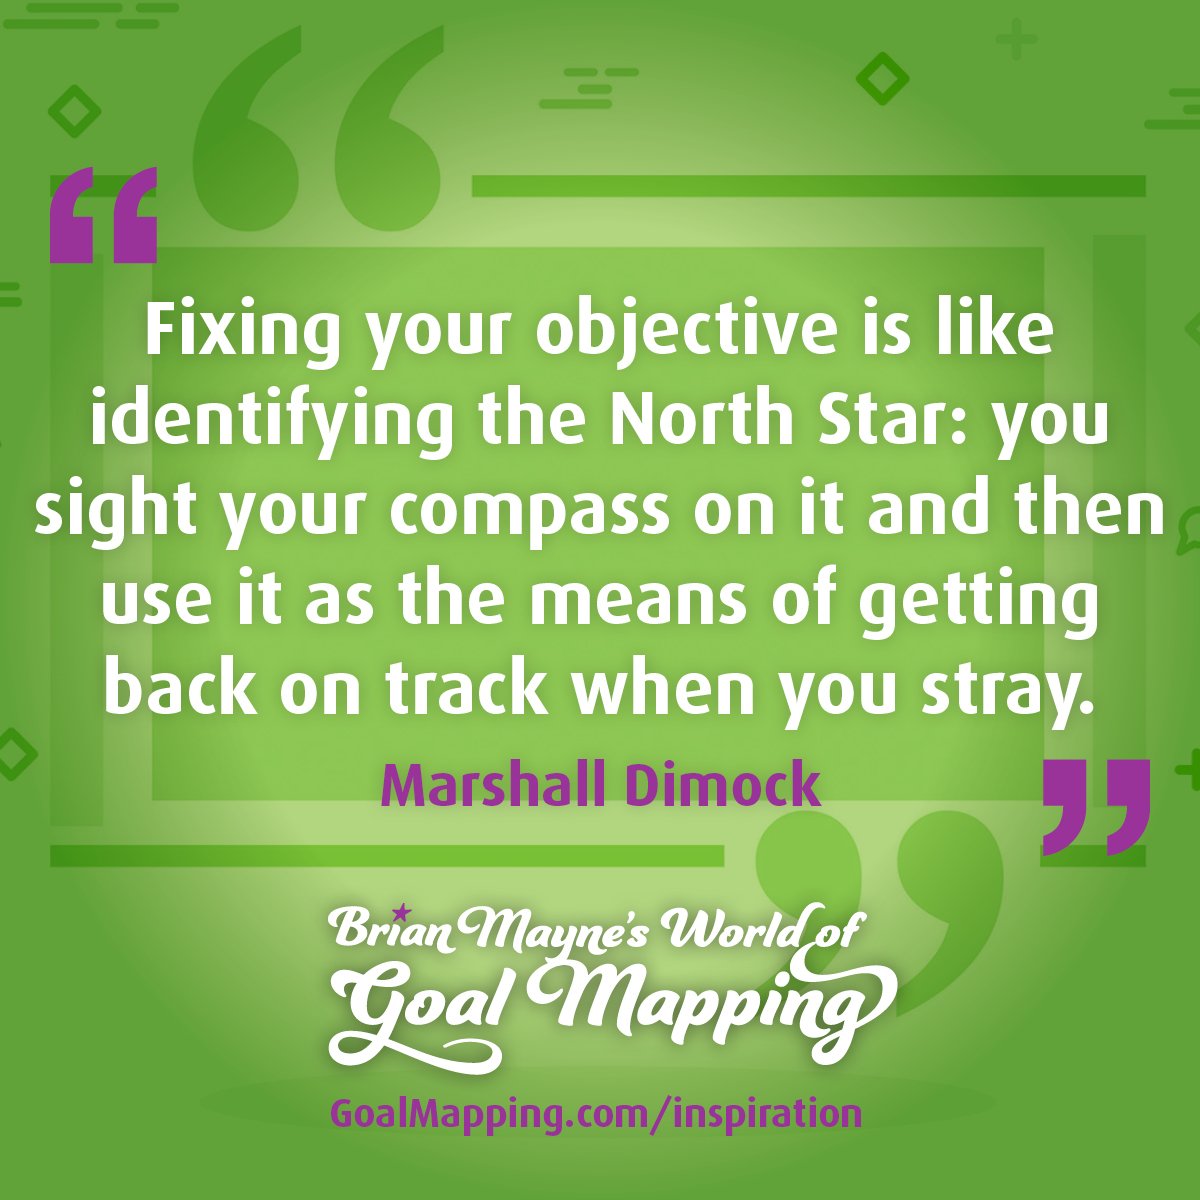 "Fixing your objective is like identifying the North Star: you sight your compass on it and then use it as the means of getting back on track when you stray." Marshall Dimock